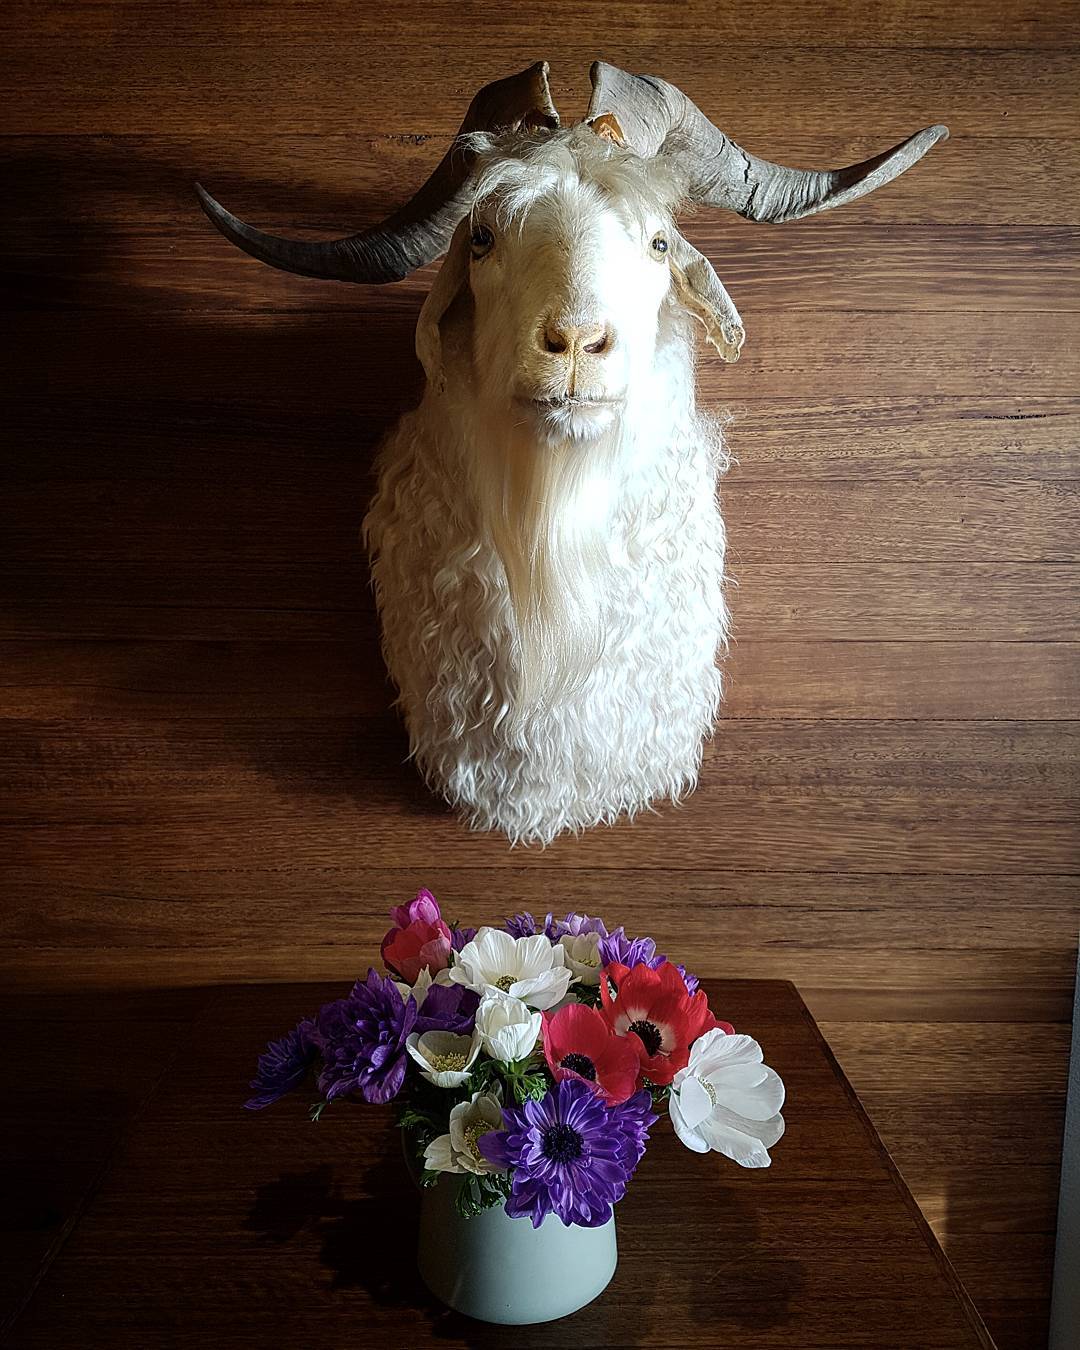 Enjoying the smell and colours of a beautiful bunch of flowers  by @lisakingstonflowers ?: @_tomsandy #flowers #tasmanianflorist #woodbridge #peppermintbay #tasmania #goat